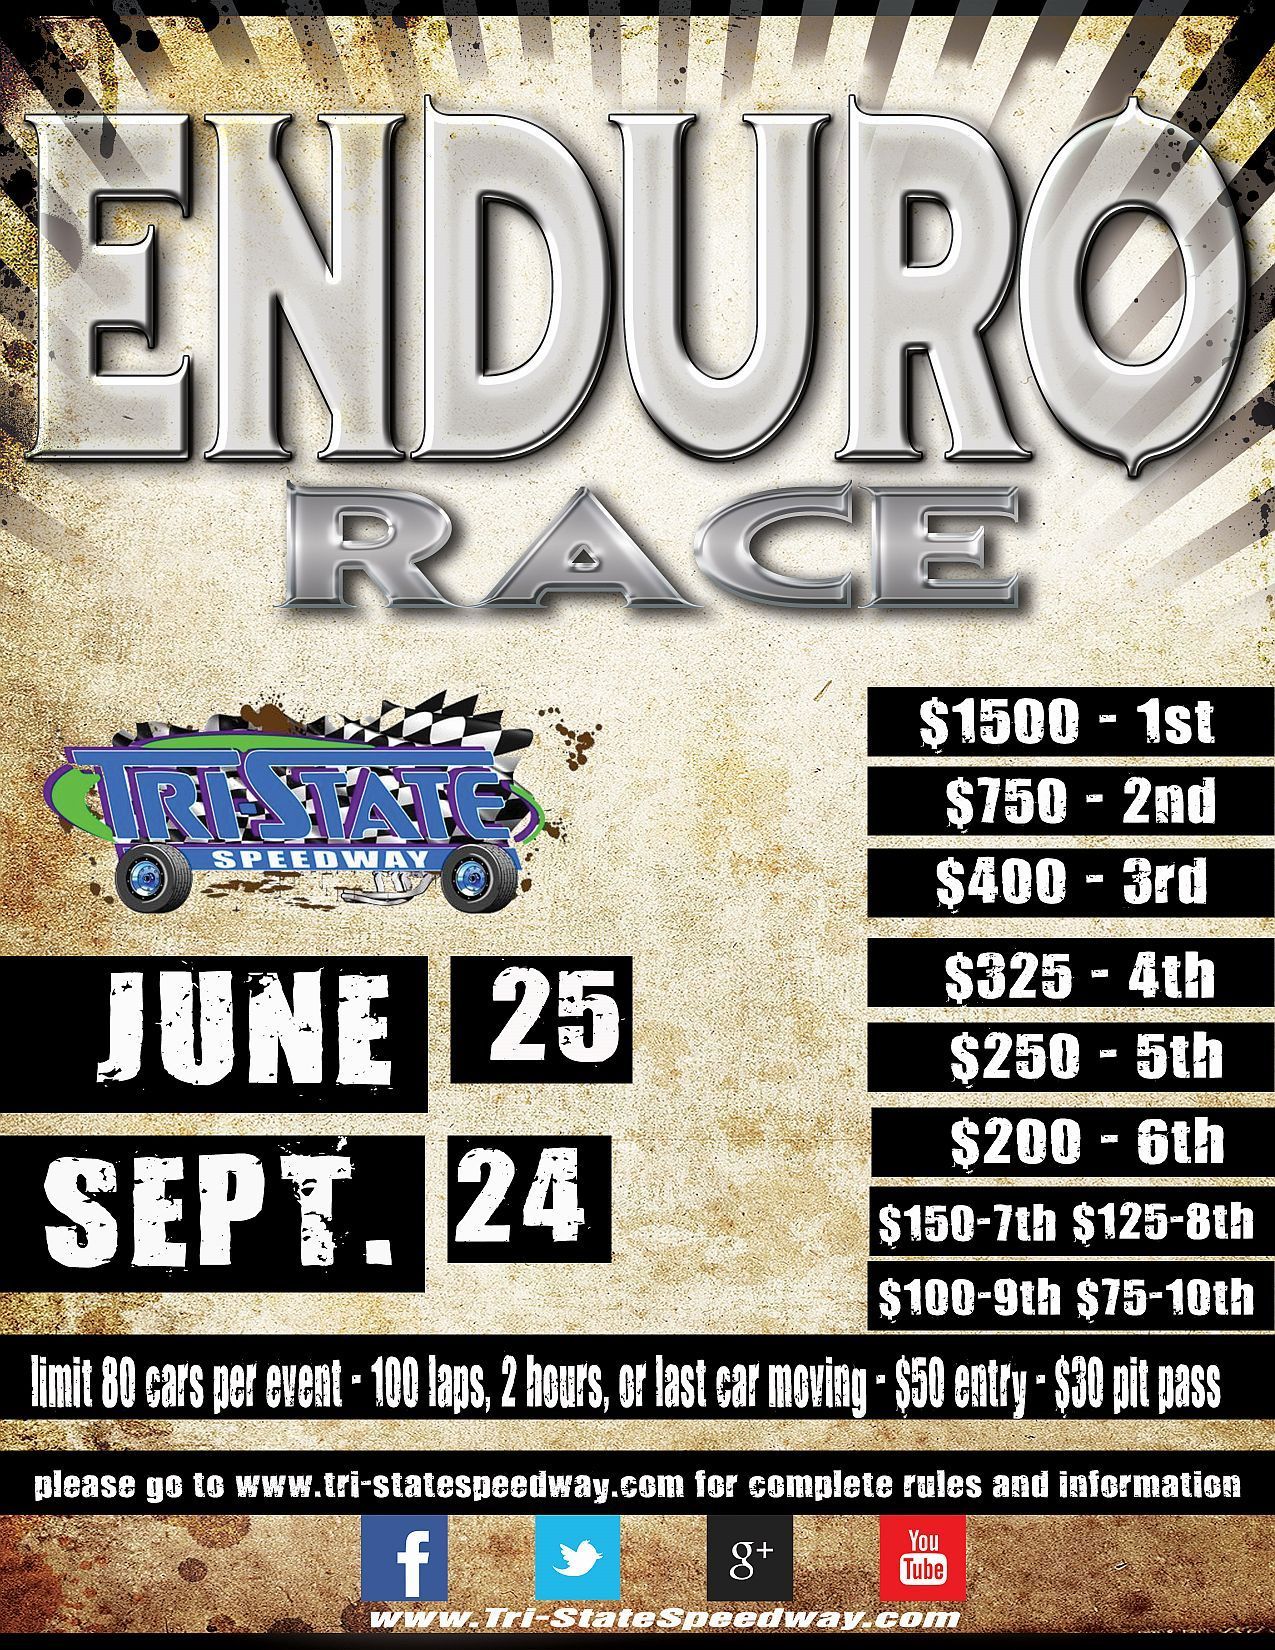 $1,500 to Win Enduro #1 - MOVED to June 25th